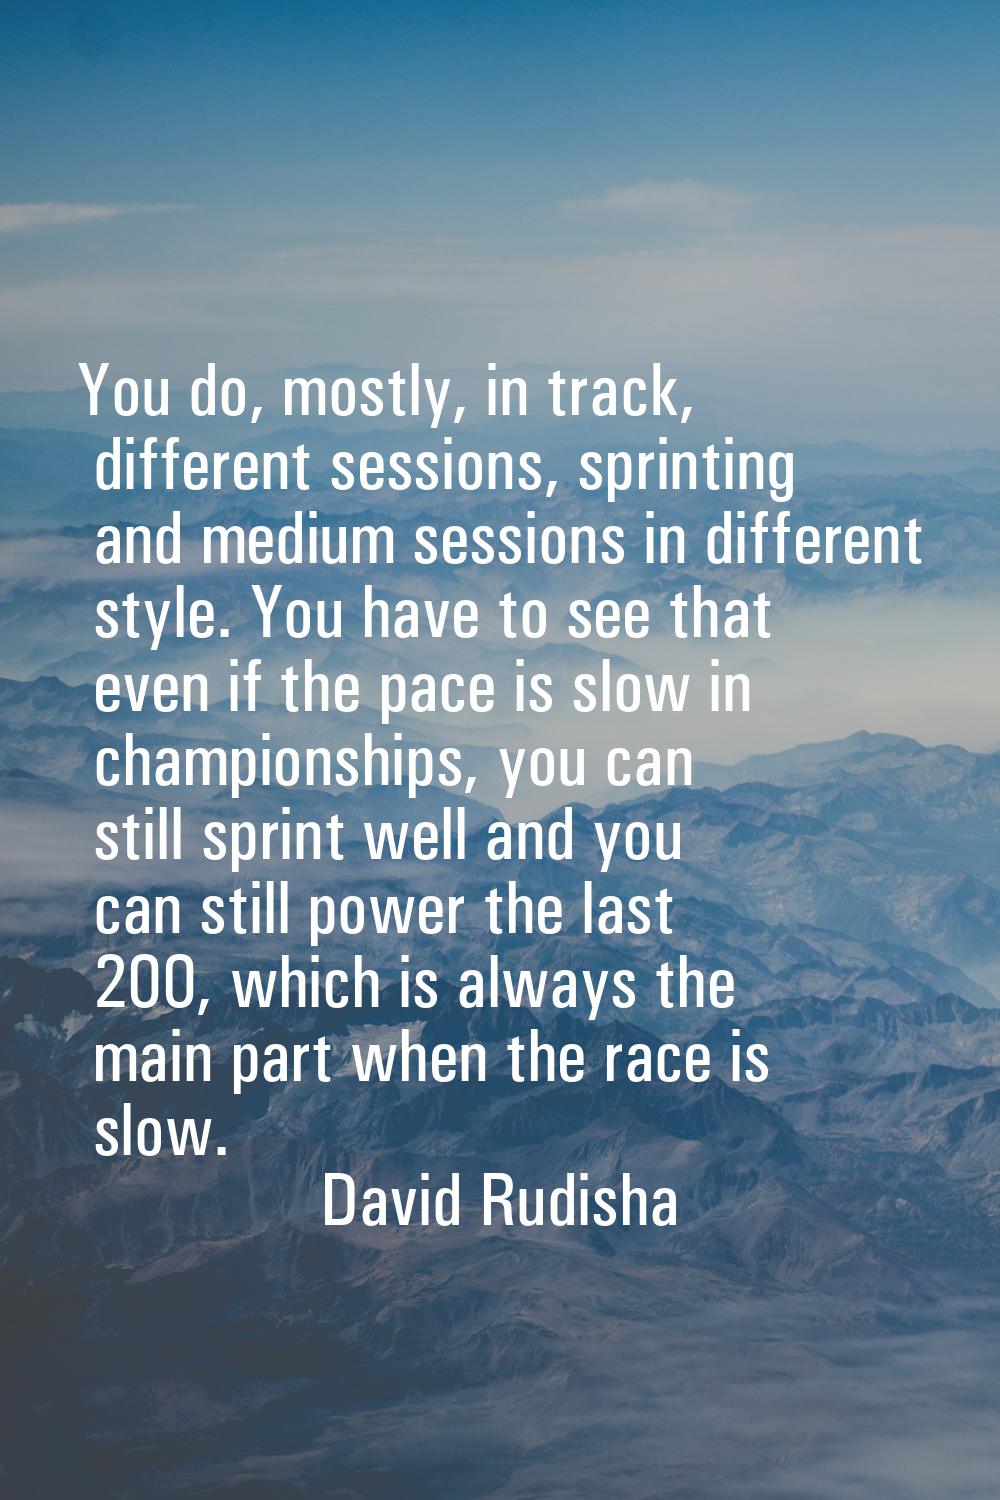 You do, mostly, in track, different sessions, sprinting and medium sessions in different style. You